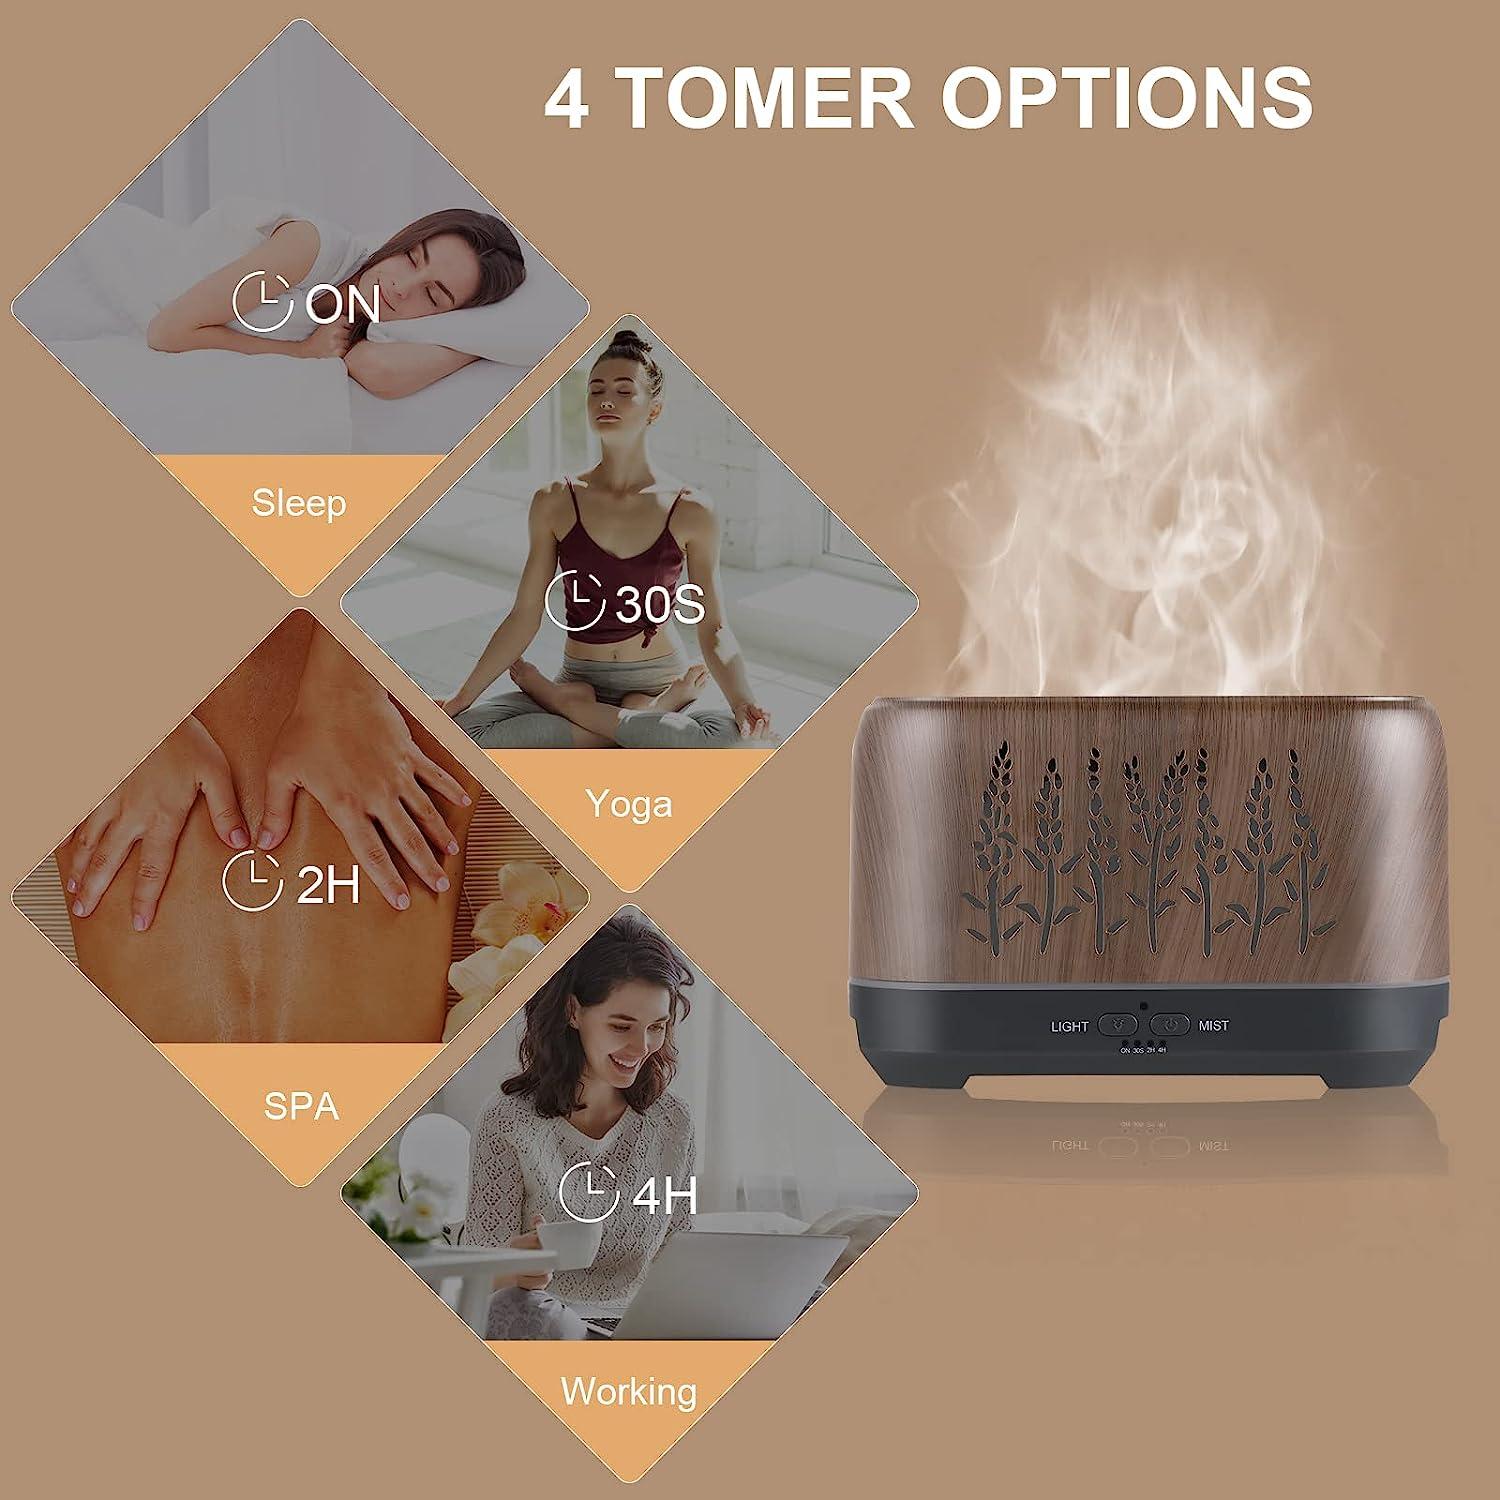 NEWYID Aromatherapy Diffuser with 5 Essential Oils, Oil Diffuser